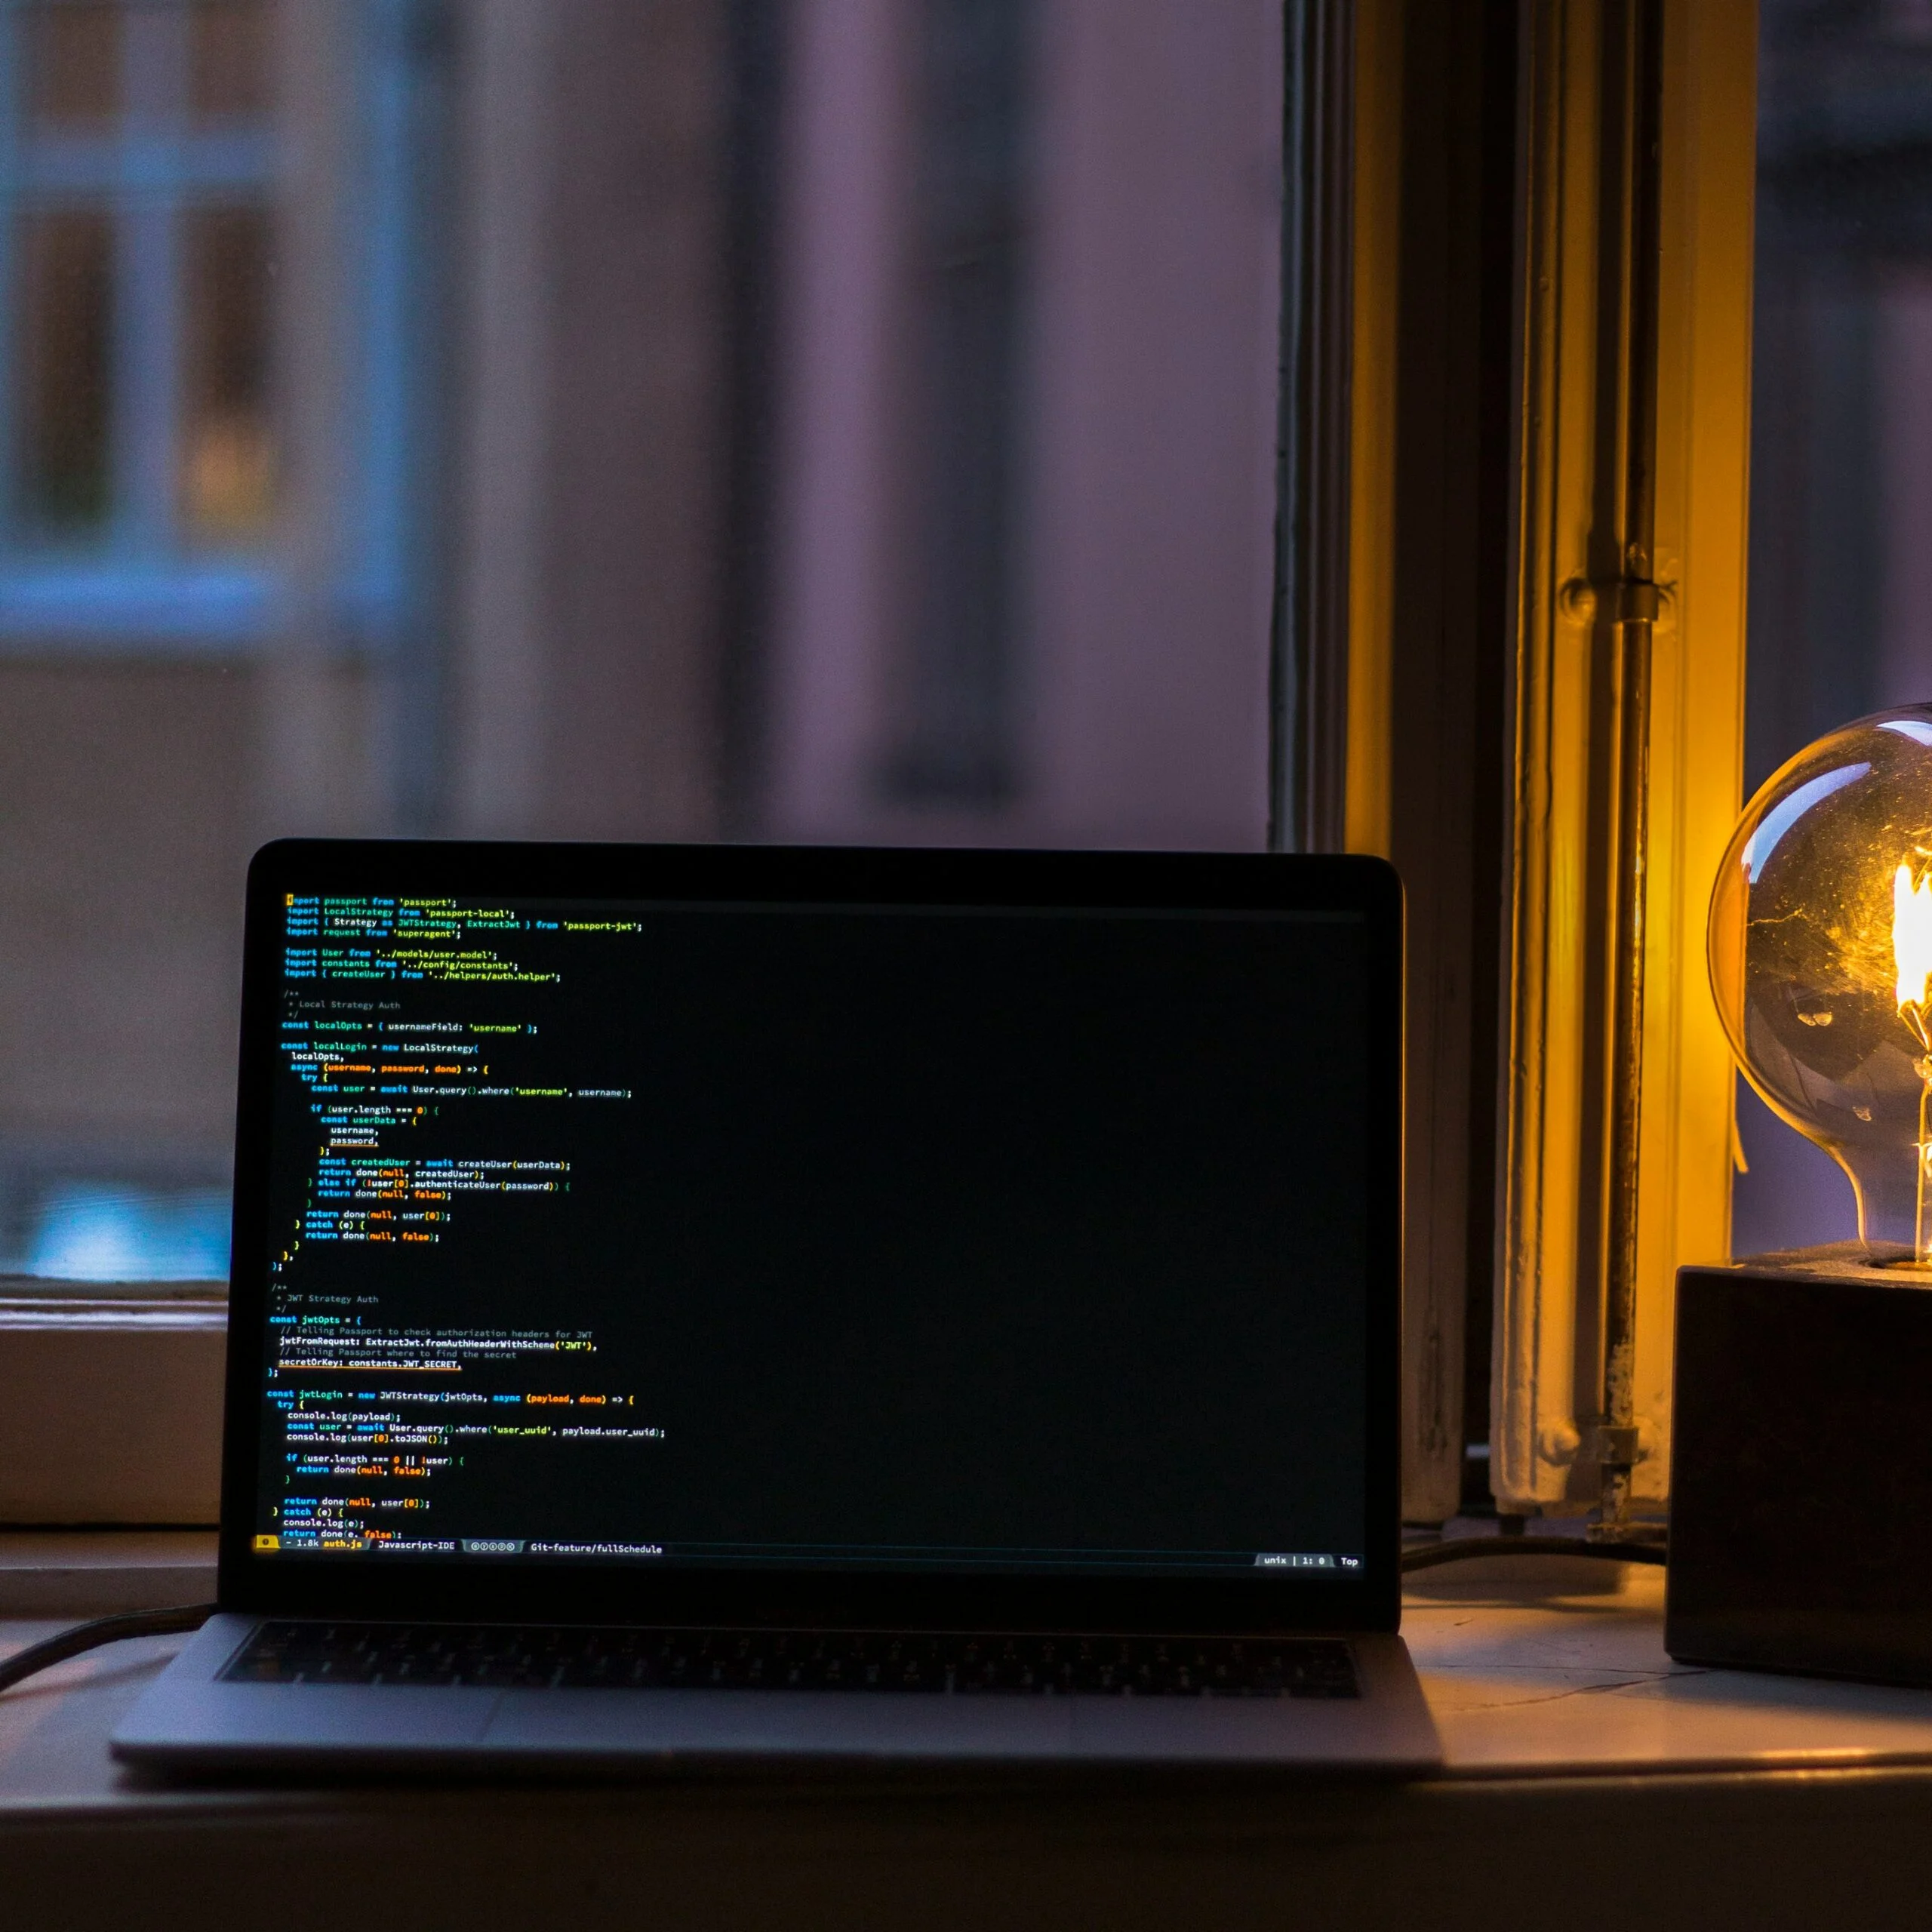 Laptop on a windowsill during an evening coding session, creating a cozy atmosphere.